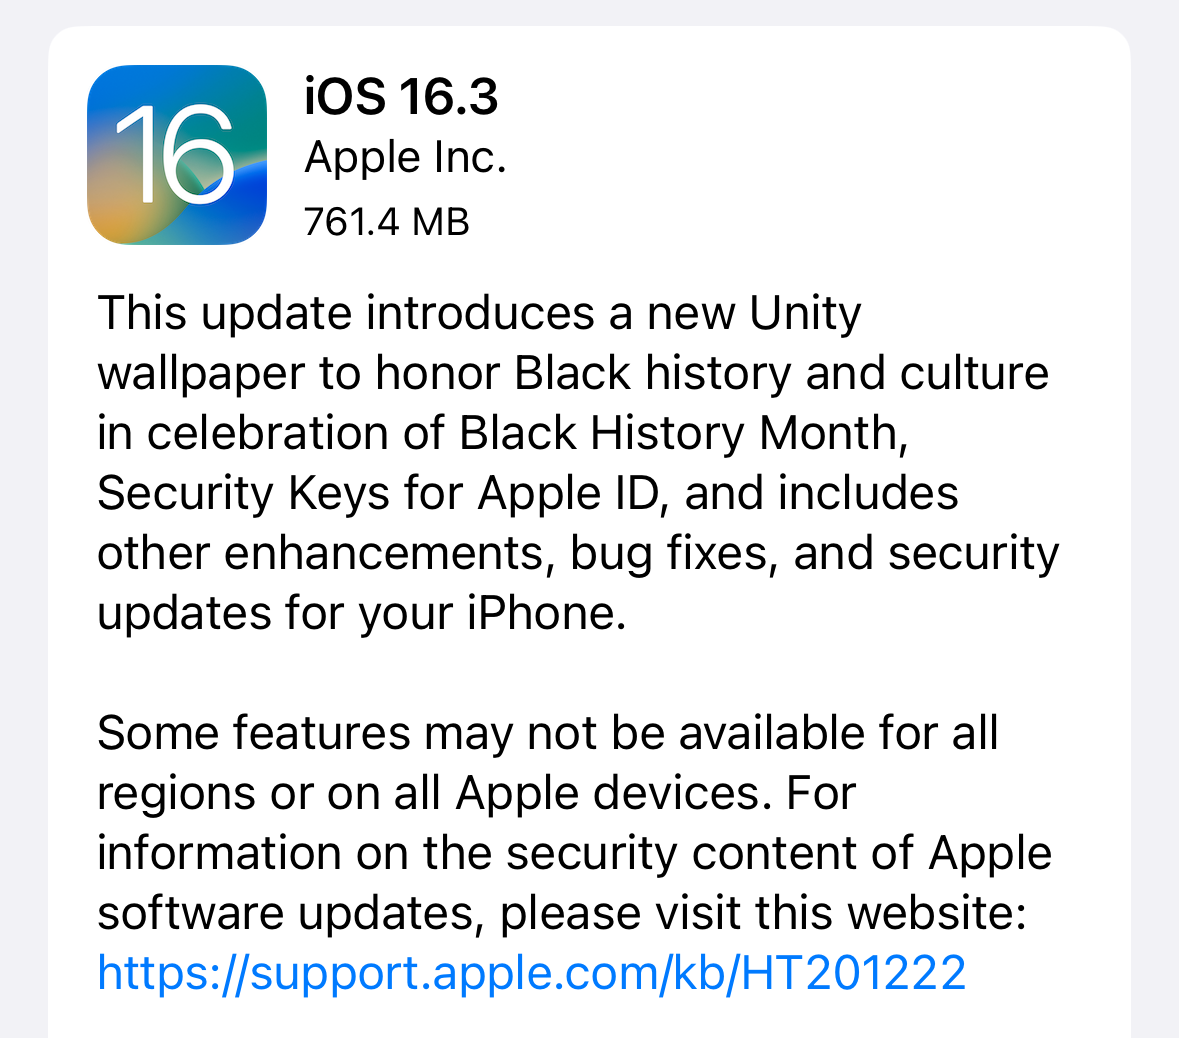 This update introduces a new Unity wallpaper to honor Black history and culture in celebration of Black History Month, Security Keys for Apple ID, and includes other enhancements, bug fixes, and security updates for your iPhone. Some features may not be available for all regions or on all Apple devices.